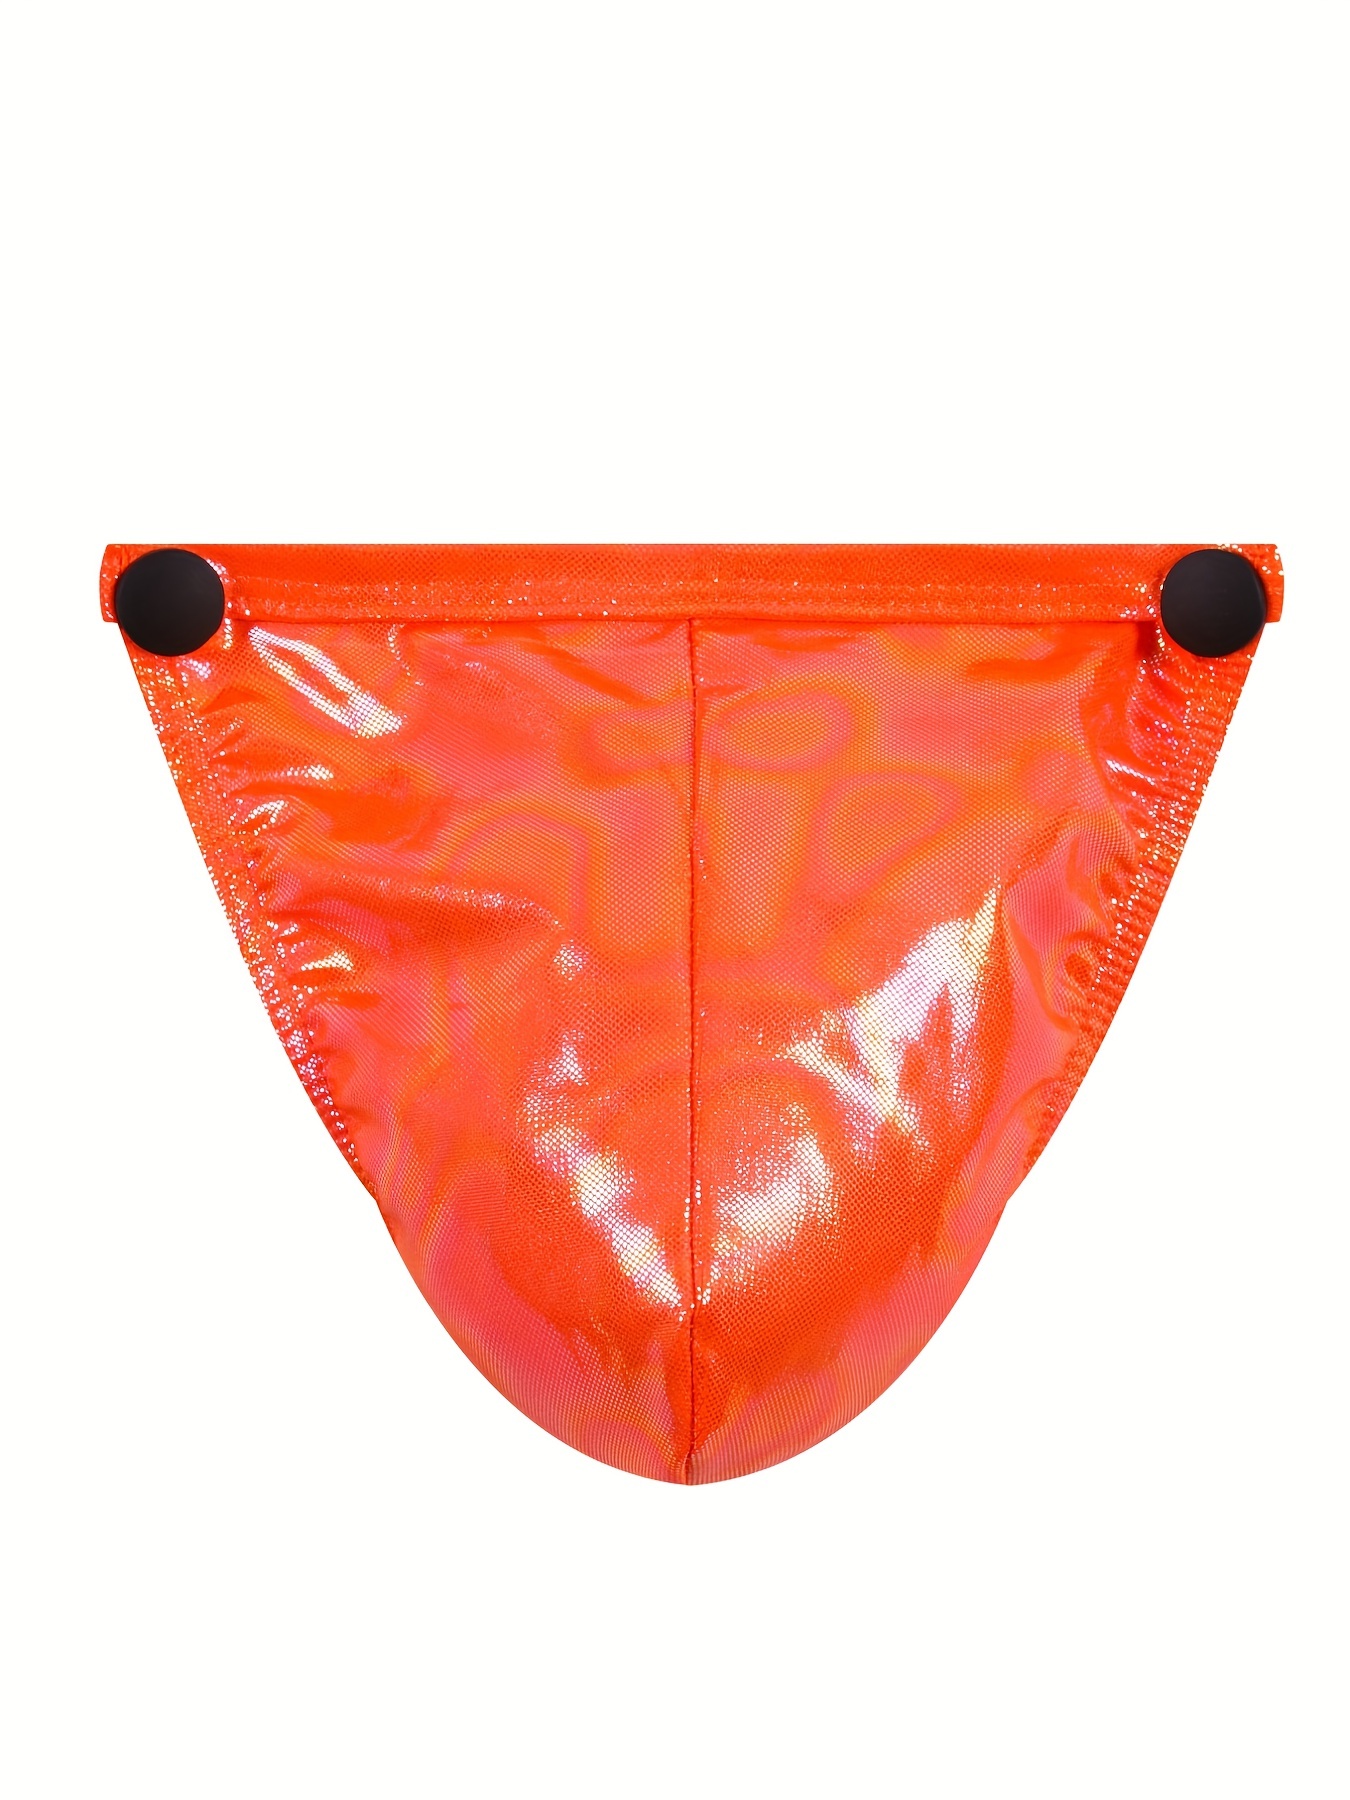 G-String for Mens PVC Underwear (X-Large, Transparent Red)